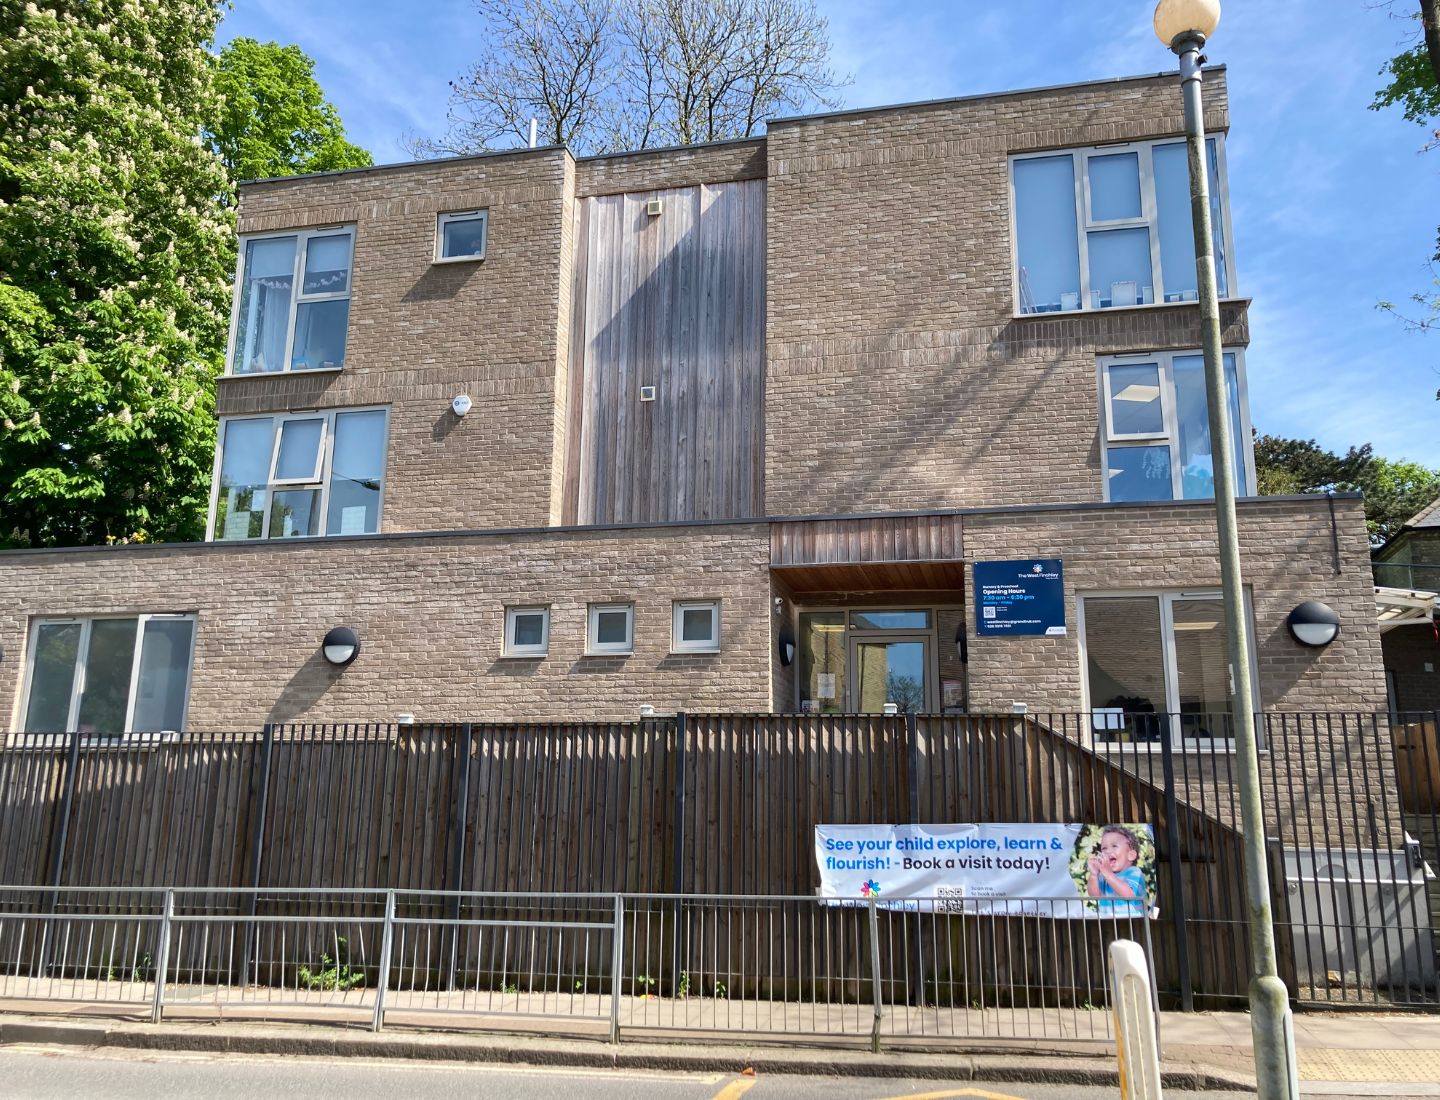 The West Finchley Day Nursery